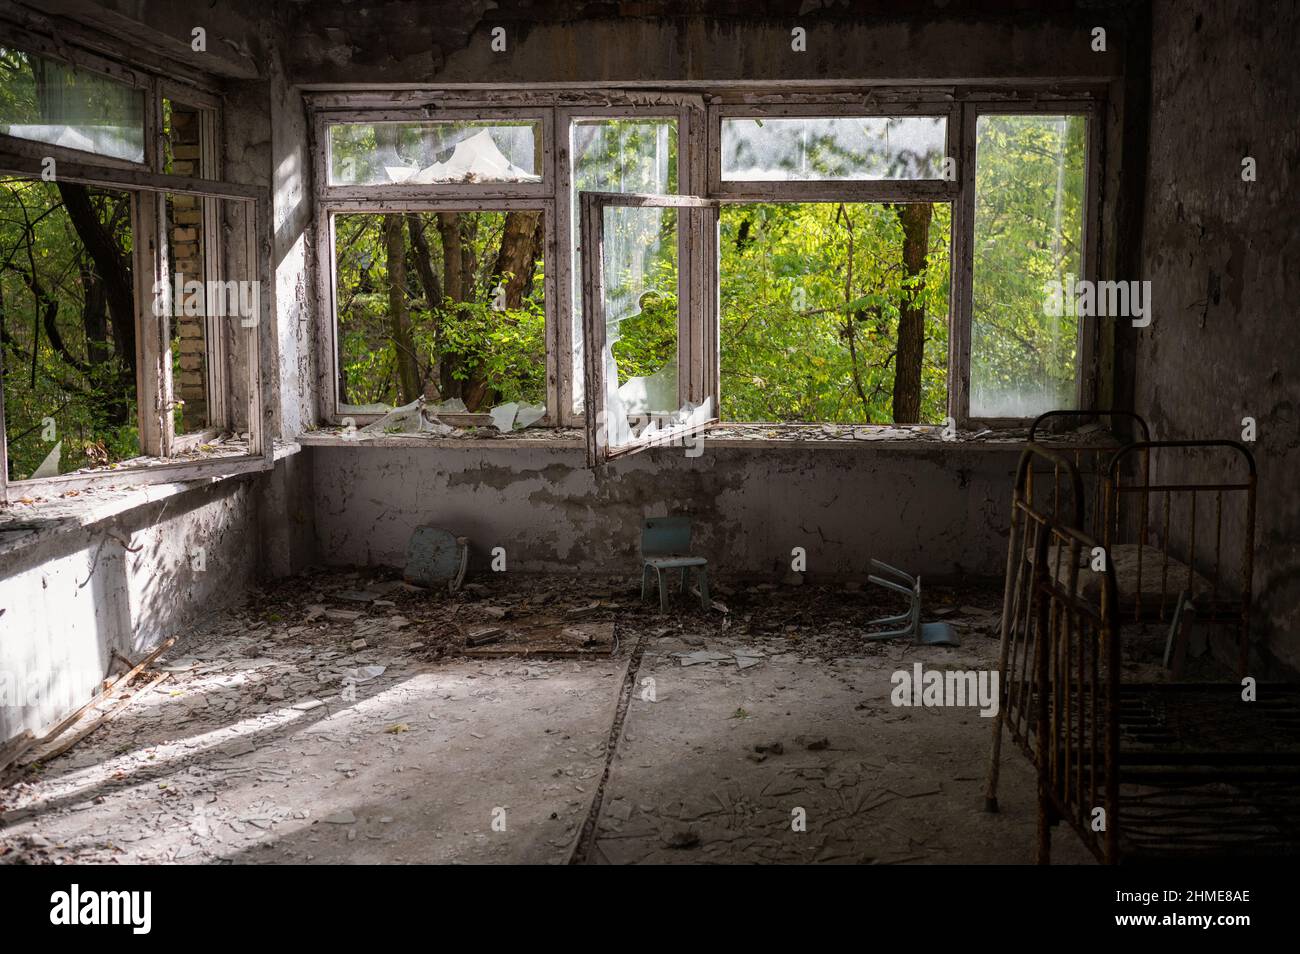 A decaying nursery in an abandoned hospital in Pripyat, Ukraine near the Chernobyl Nuclear Power Plant. Stock Photo